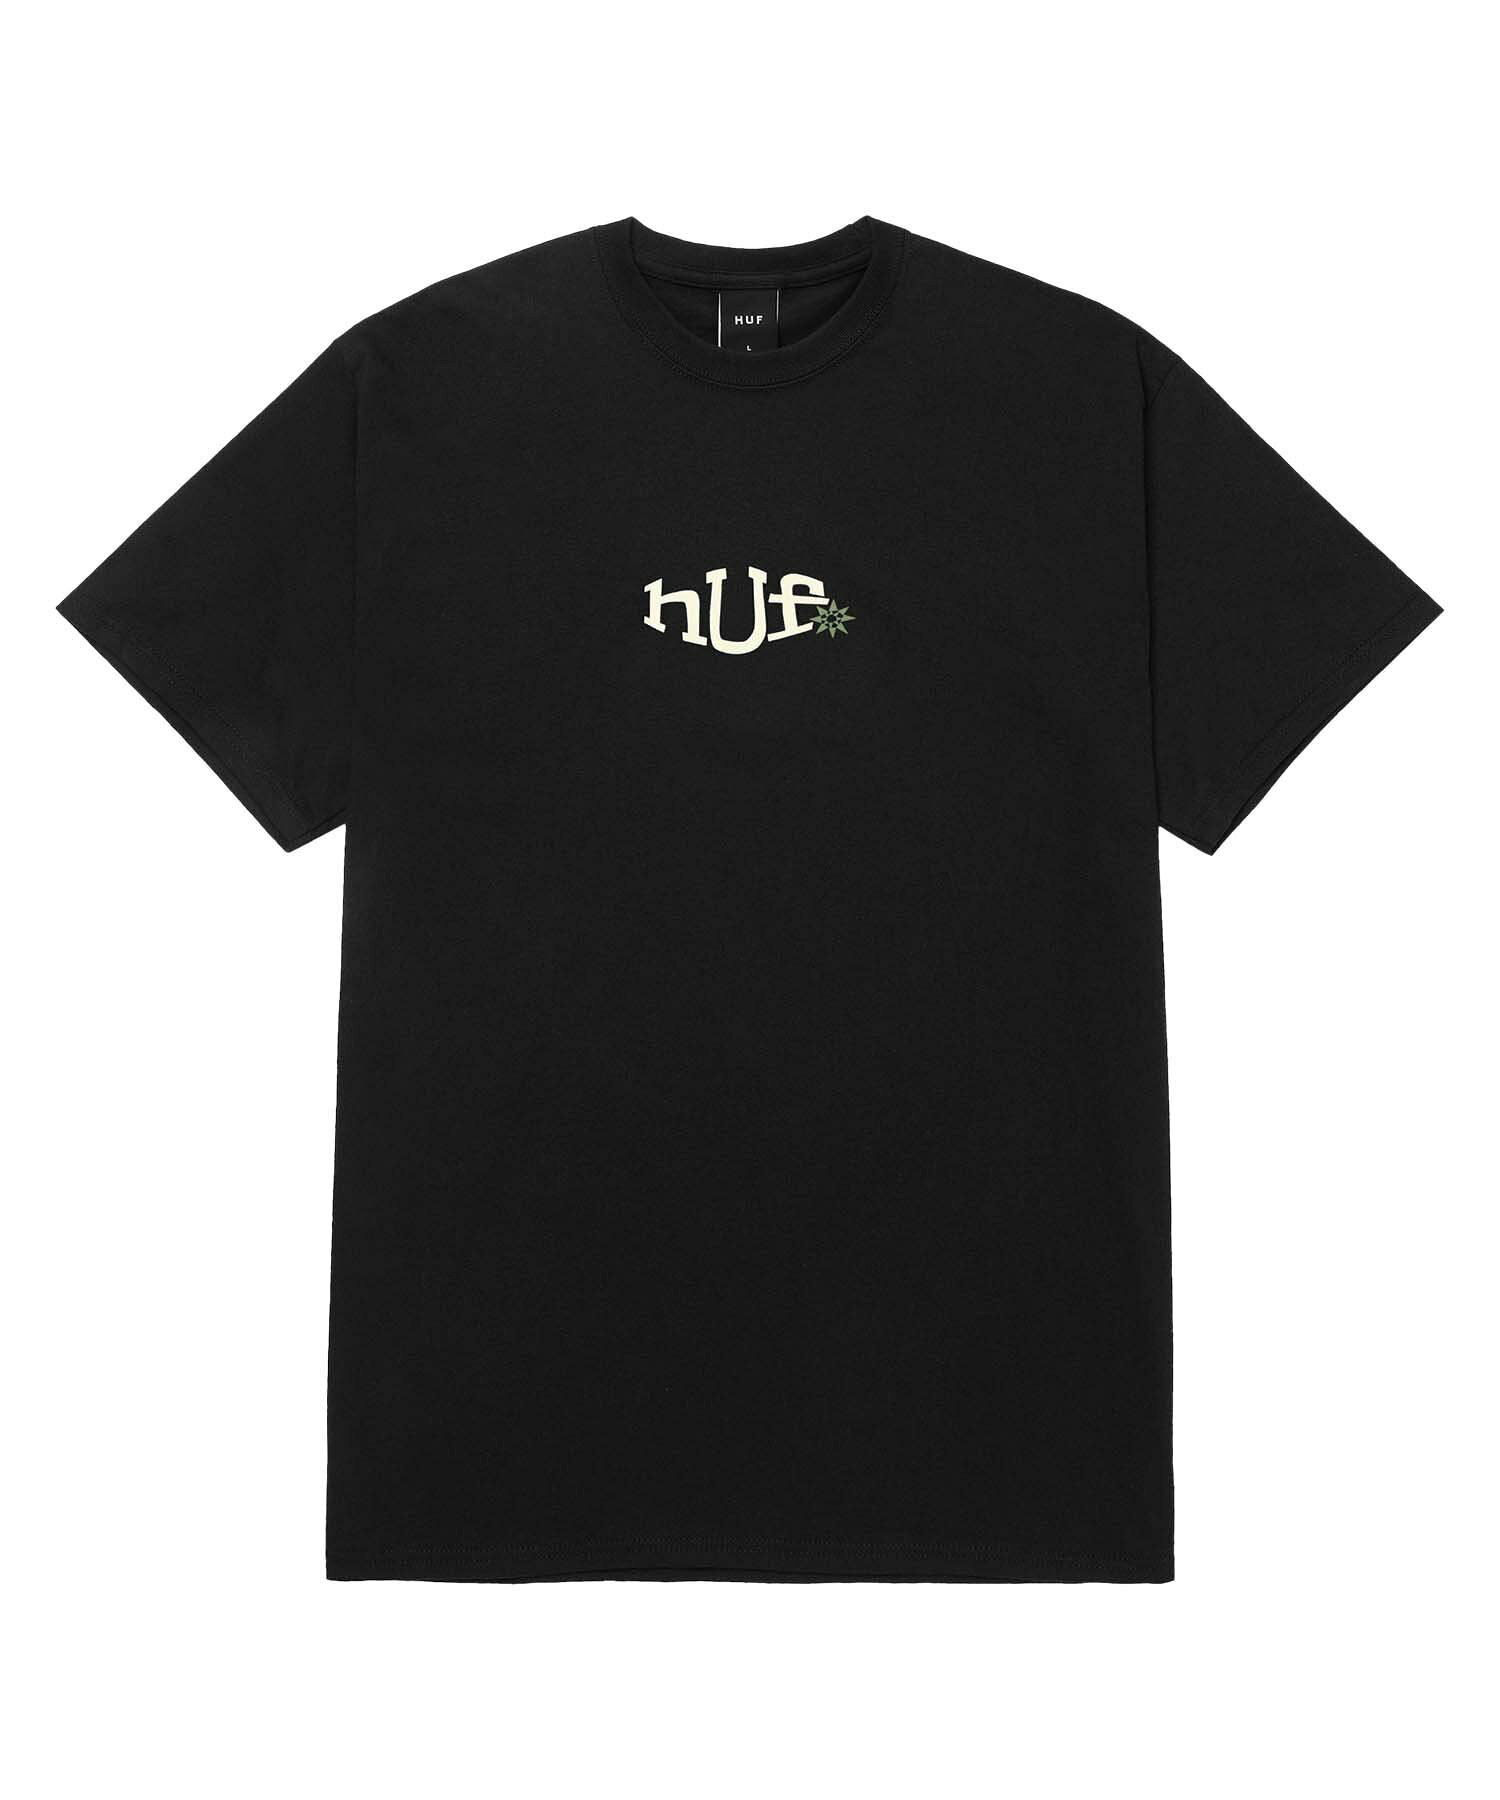 JAZZY GROOVES S/S TEE HUF ハフ Tシャツ